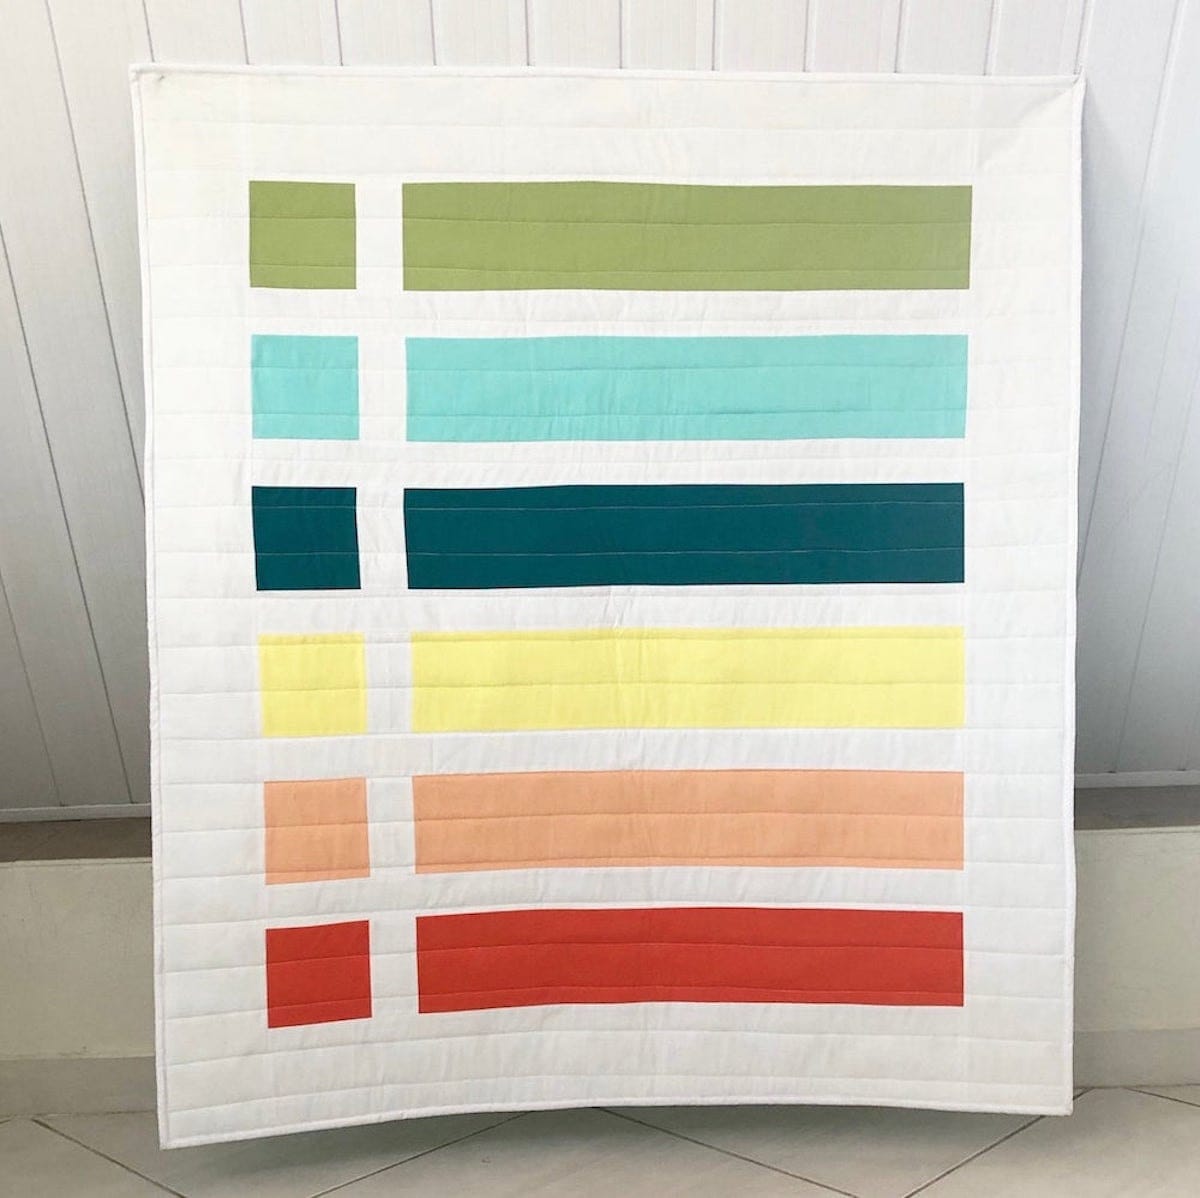 A colorful baby quilt kit from Etsy